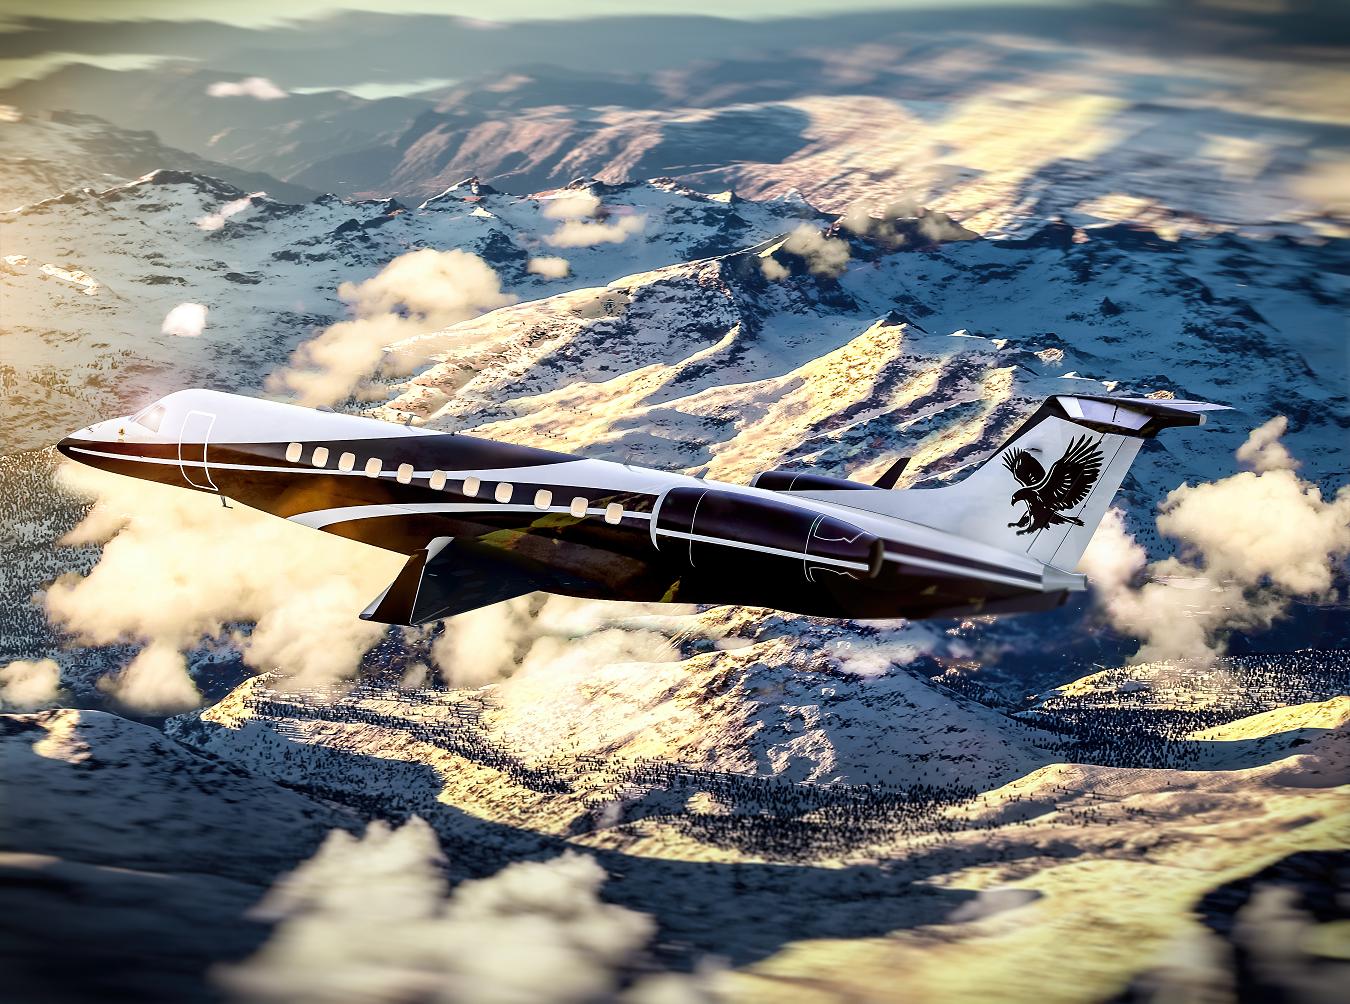 Embraer Executive Jets announces order for new Legacy 650 large jet to an undisclosed customer in the Middle East